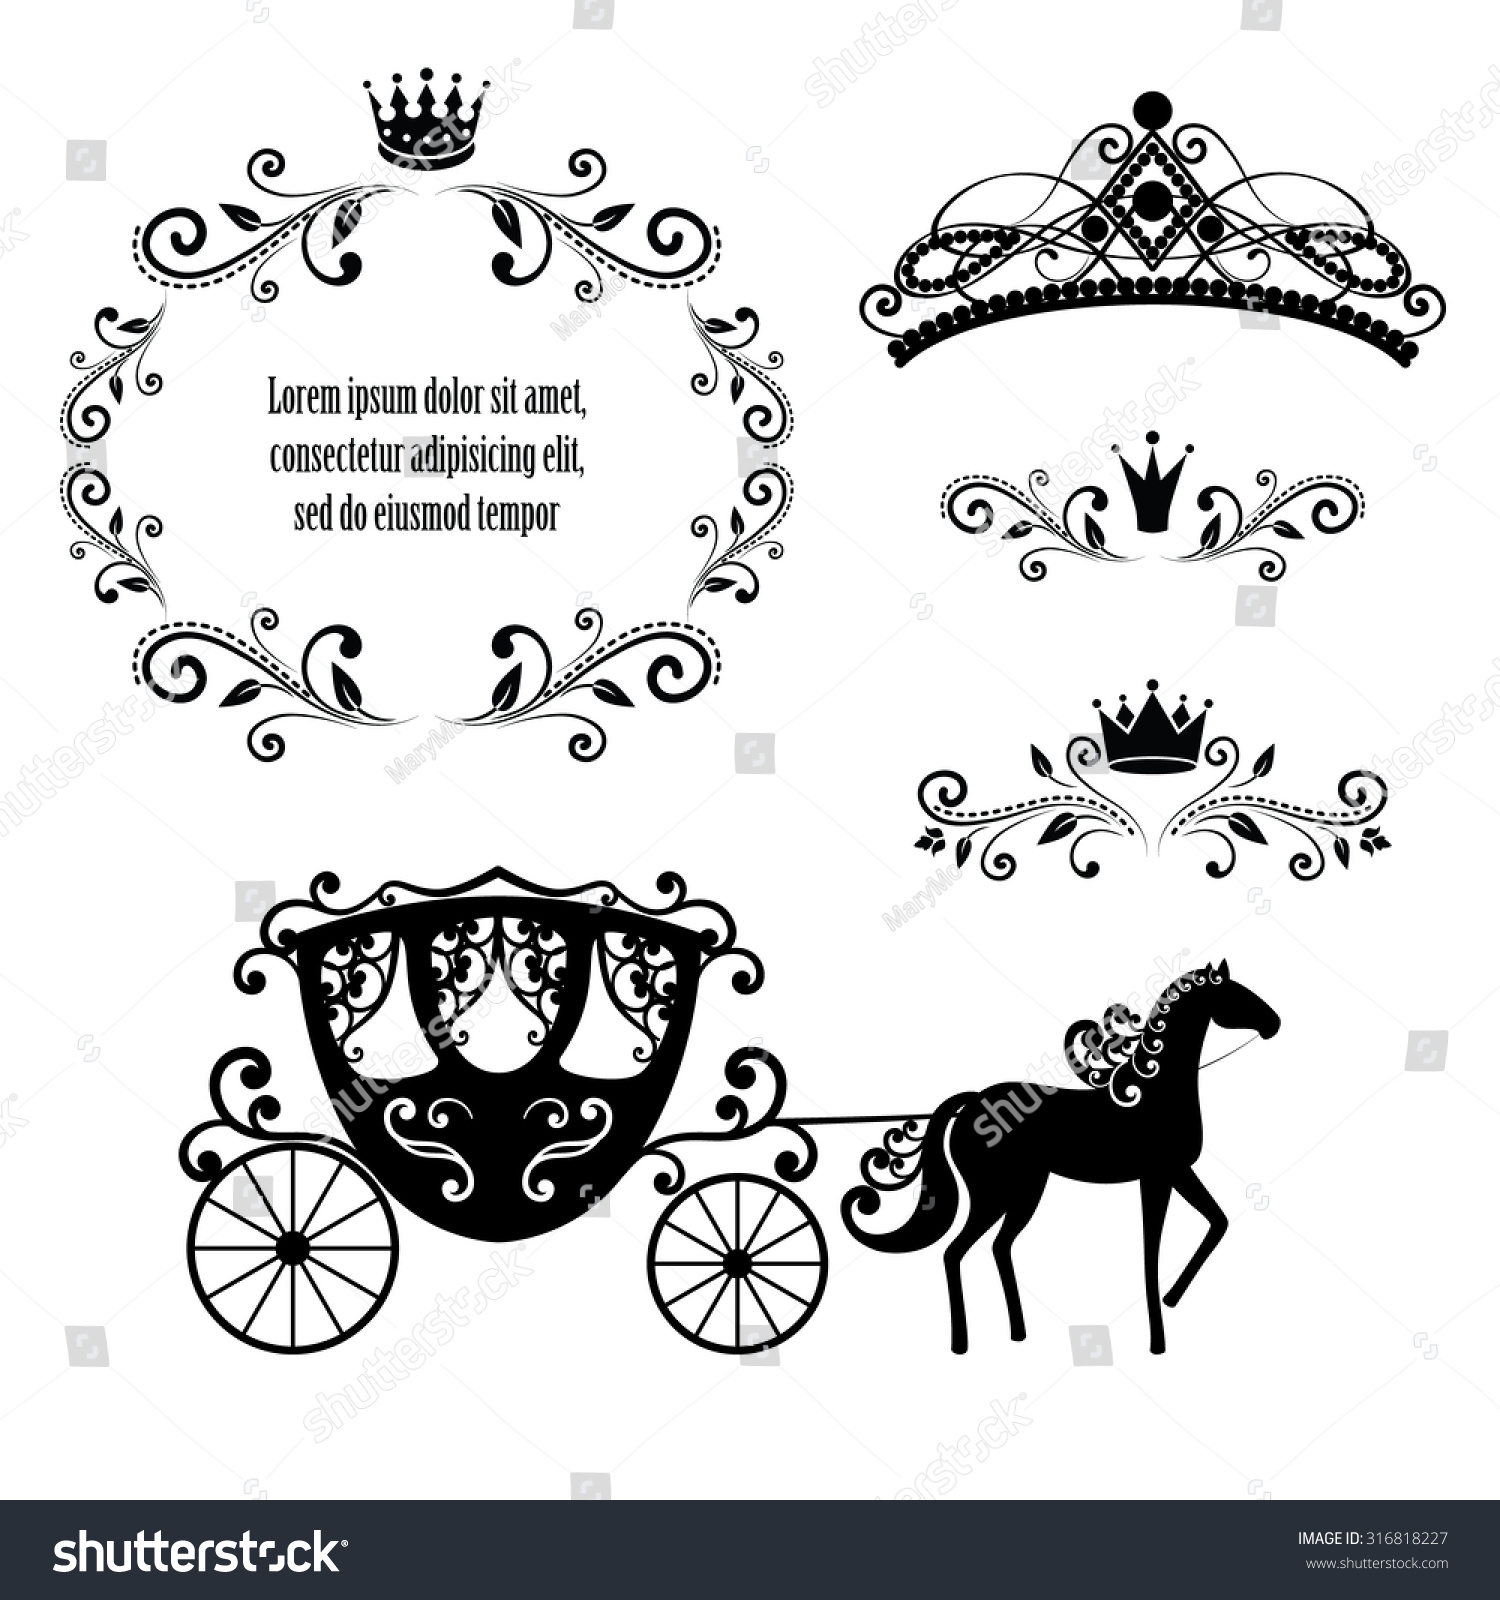 SVG of Design elements, vintage royalty frame with crown, ornamental style diadem, carriage in black color. Vector illustration. Isolated on white background. Can use for birthday card, wedding invitations. svg